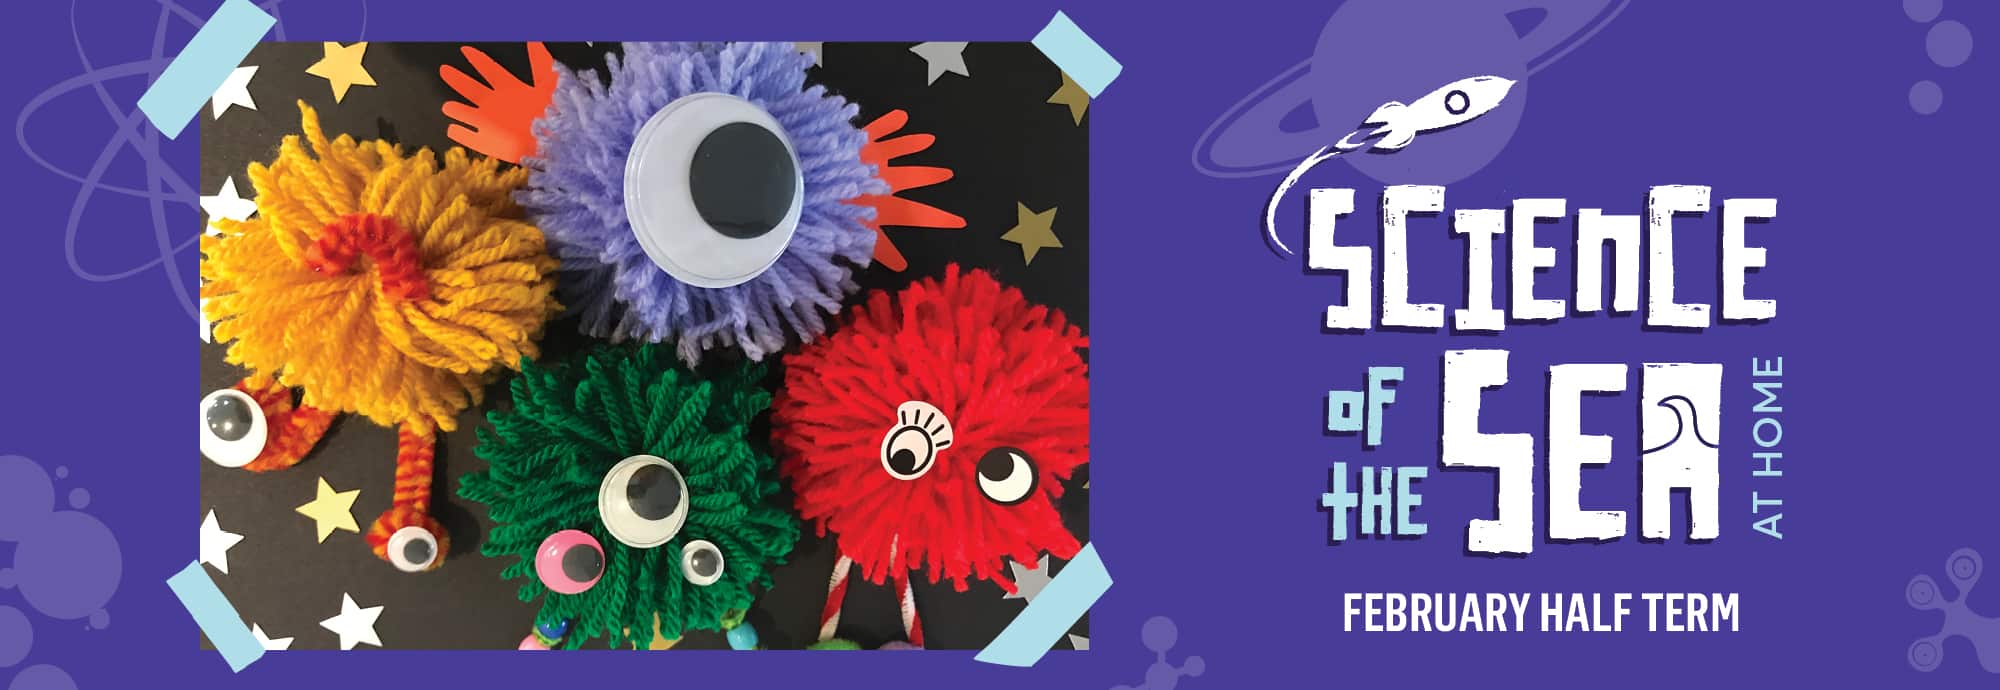 On the right, against a purple background, is text that reads 'Science of the Sea at Home' and 'February half term'. On the left is a picture of four 'pom pom aliens' made from pom poms and googly eyes.